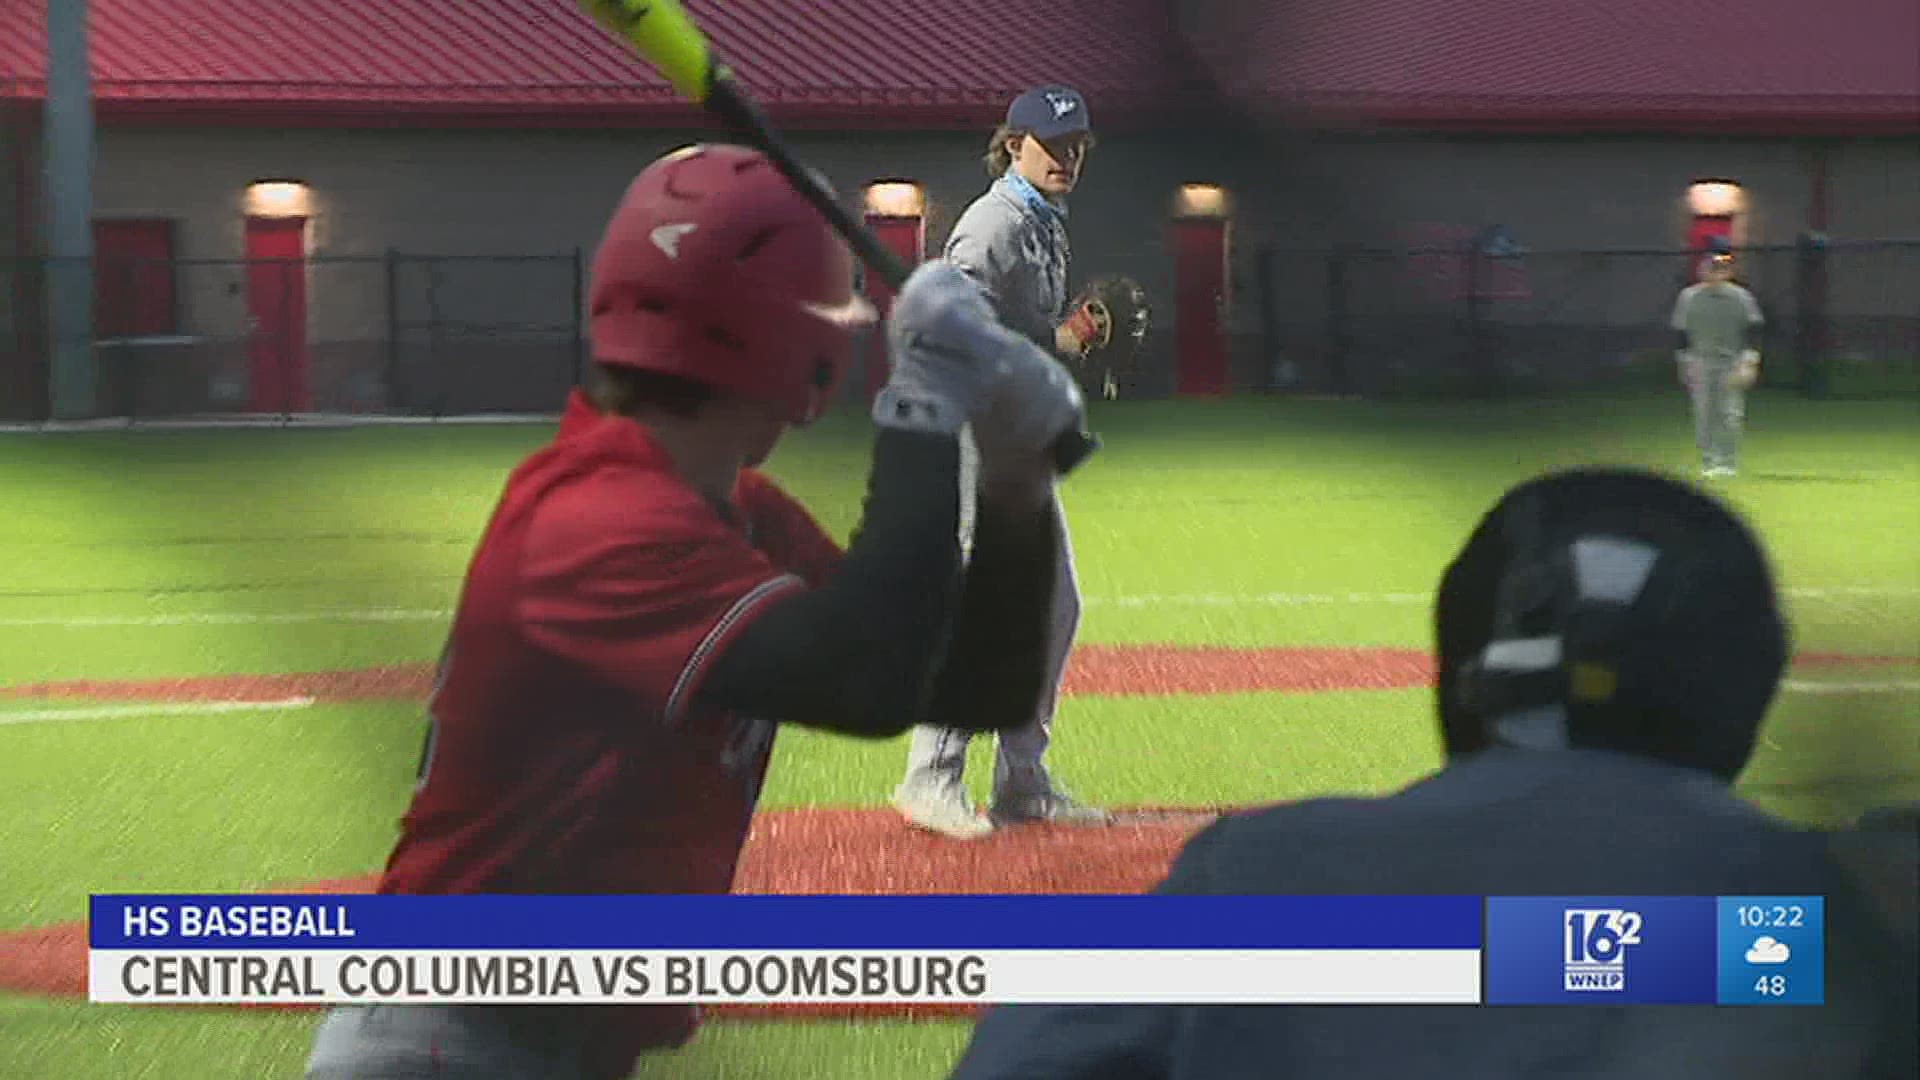 Despite committing five errors and leaving 11 runners on base, Central Columbia beat Bloomsburg 6-4 in HS baseball.